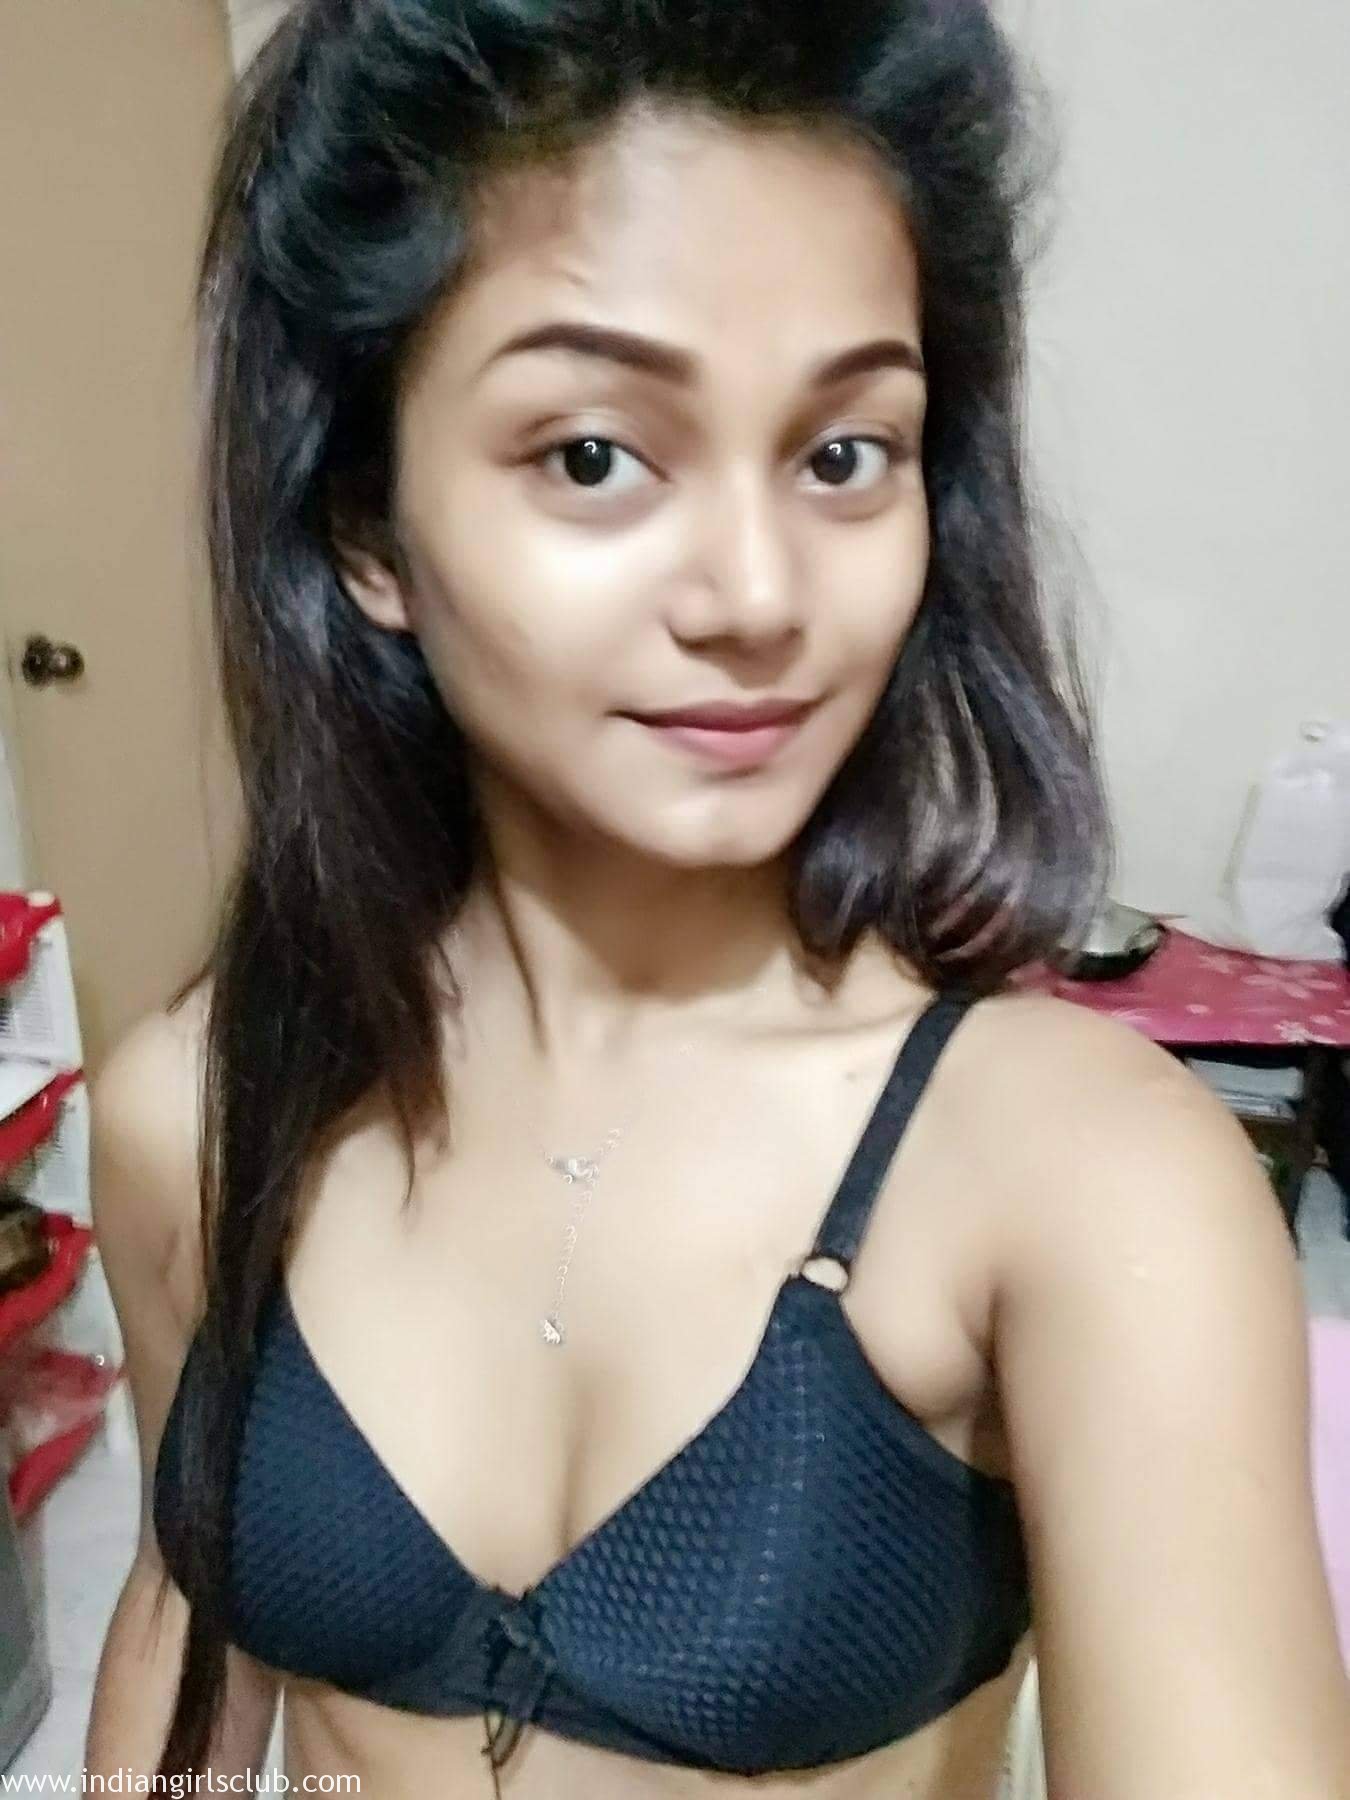 juicy_indian_teen_homemade_porn_16 - Indian Girls Club picture